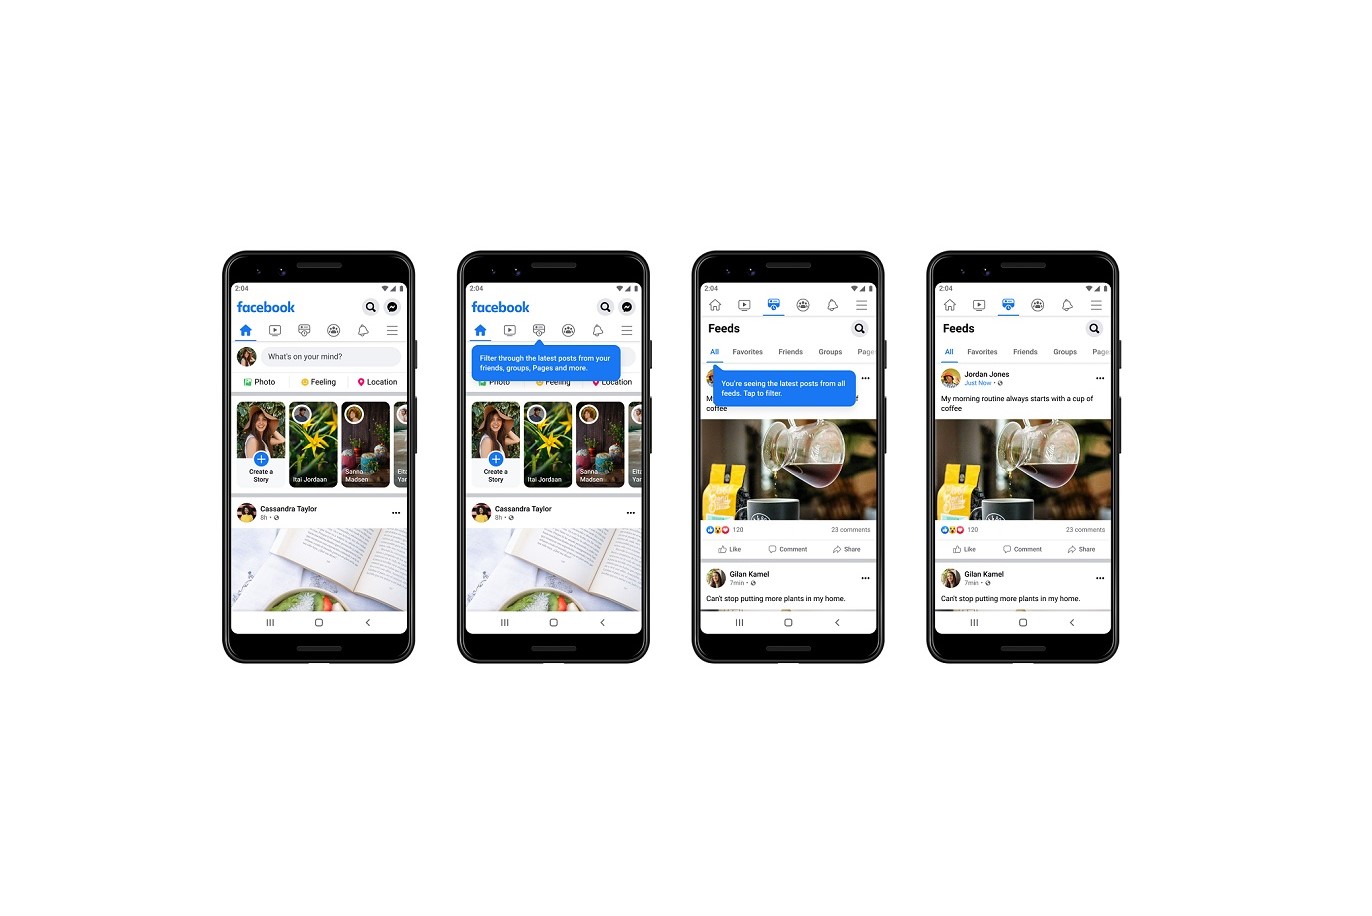 Facebook launches 'Feeds' tab that shows users newest posts first